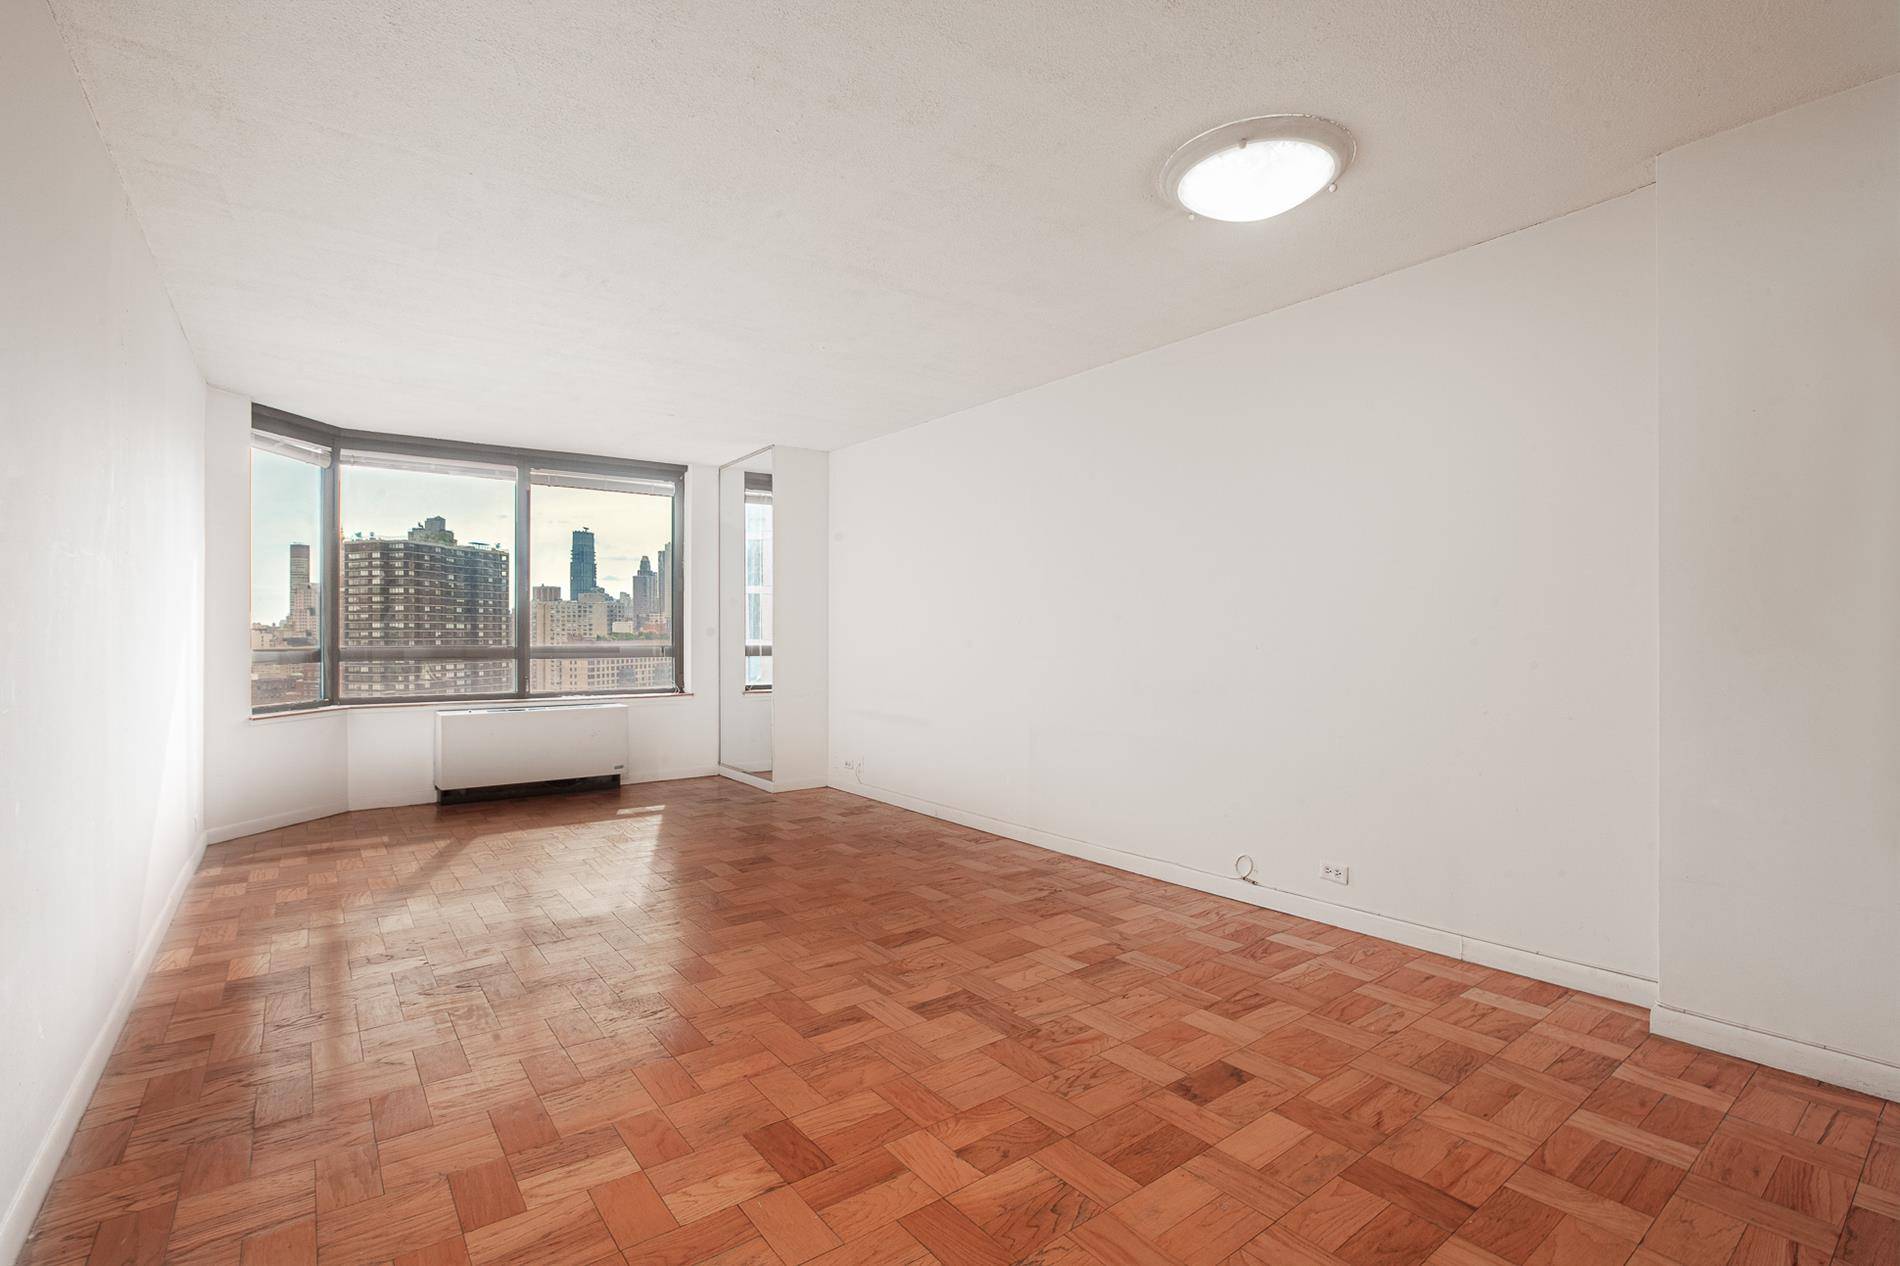 Free Amenities ! ! ! Sun flooded One bedroom with amazing UNOBSTRUCTED Park and the EMPIRE STATE Building views from every room.